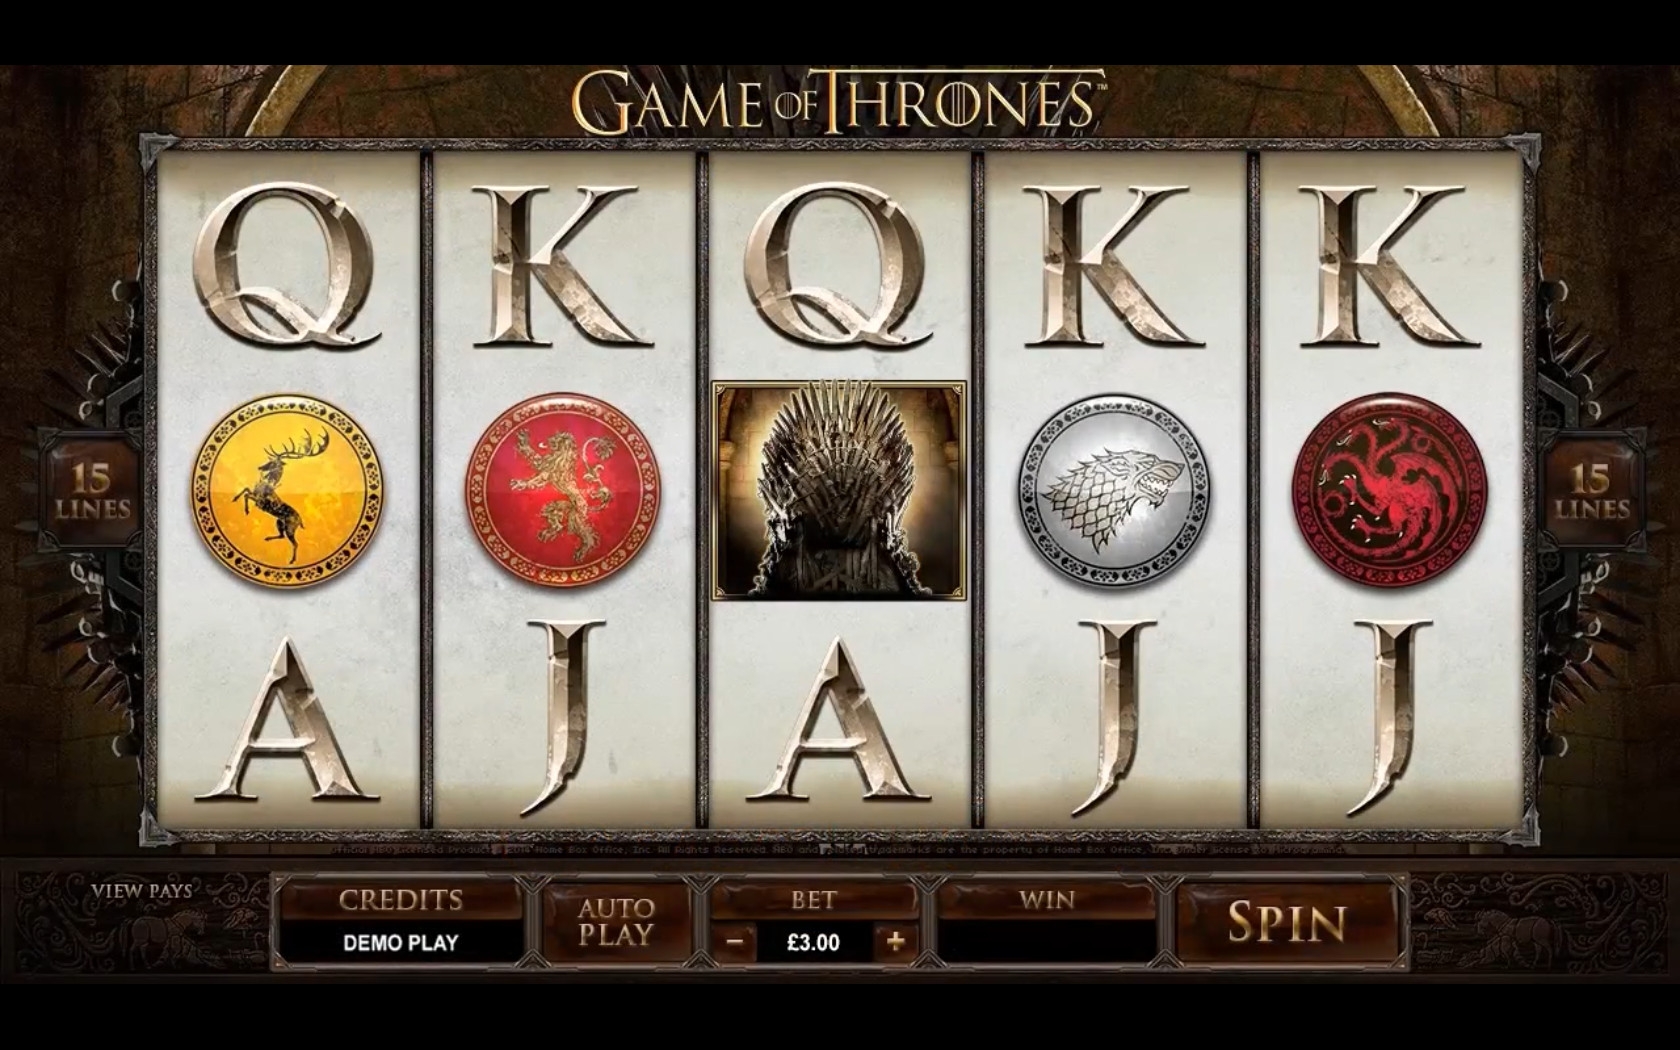 Game of Thrones (Game of Thrones) from category Slots